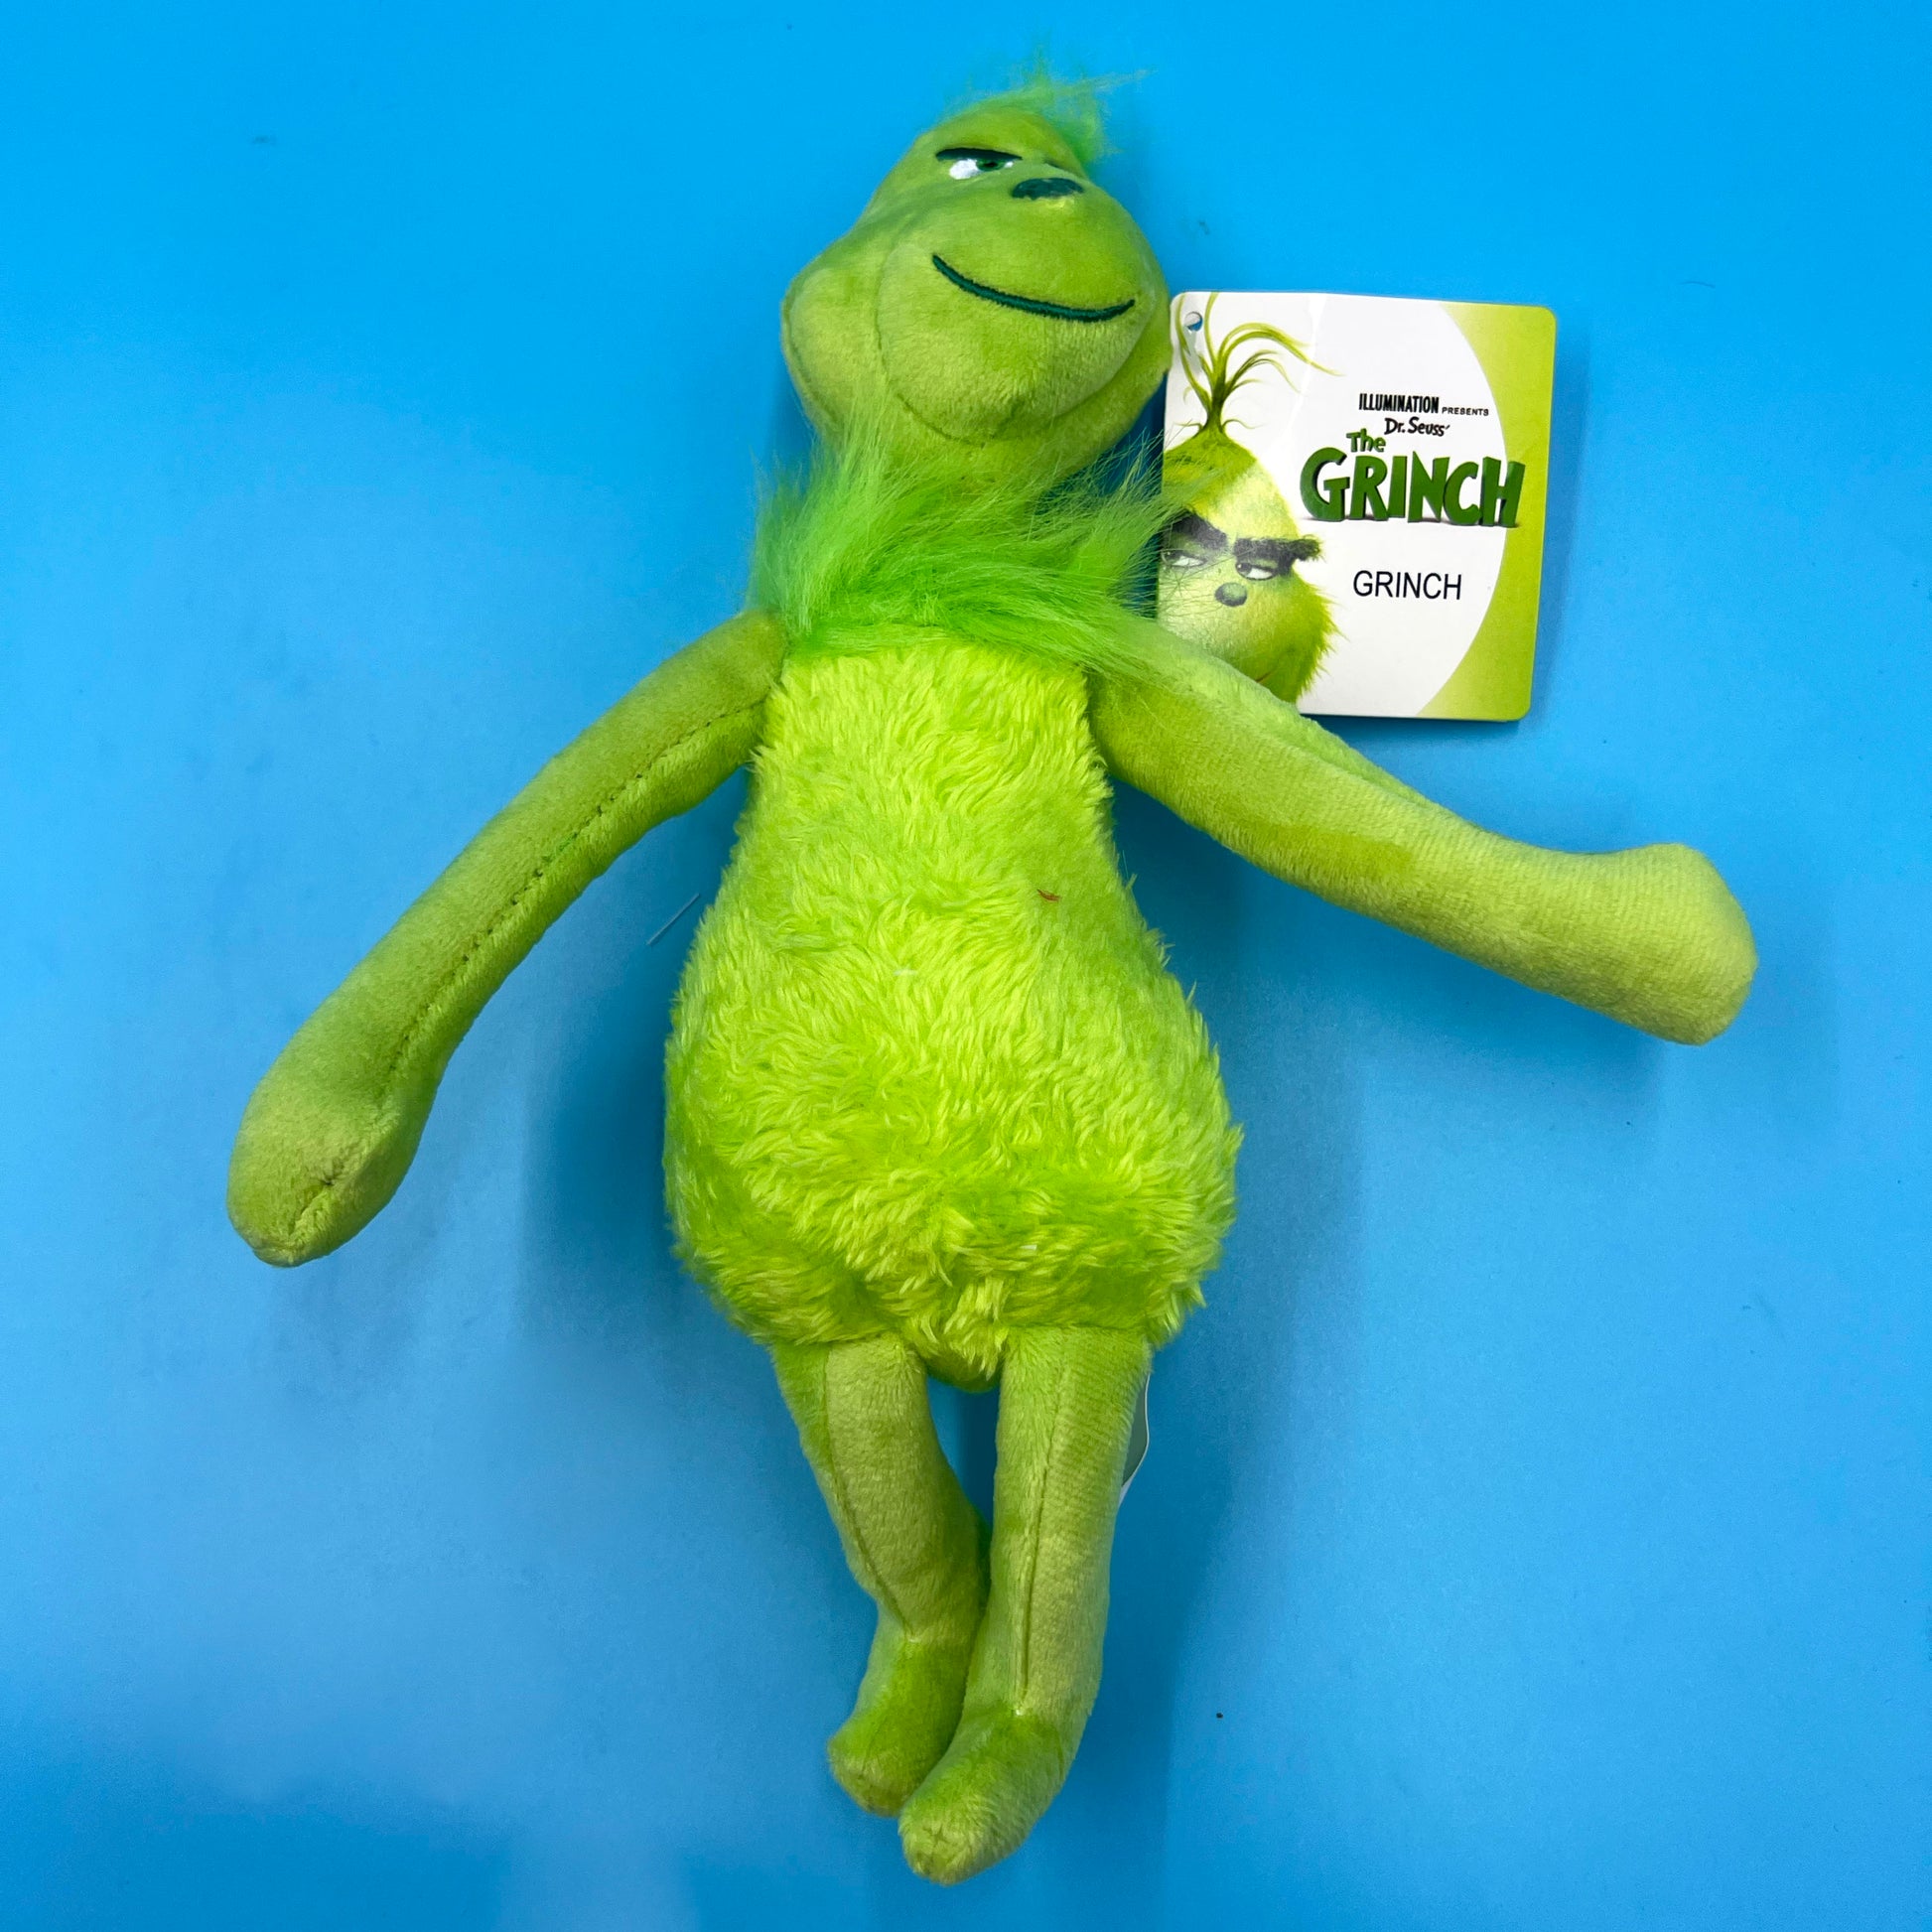 The grinch Toy bearsupreme